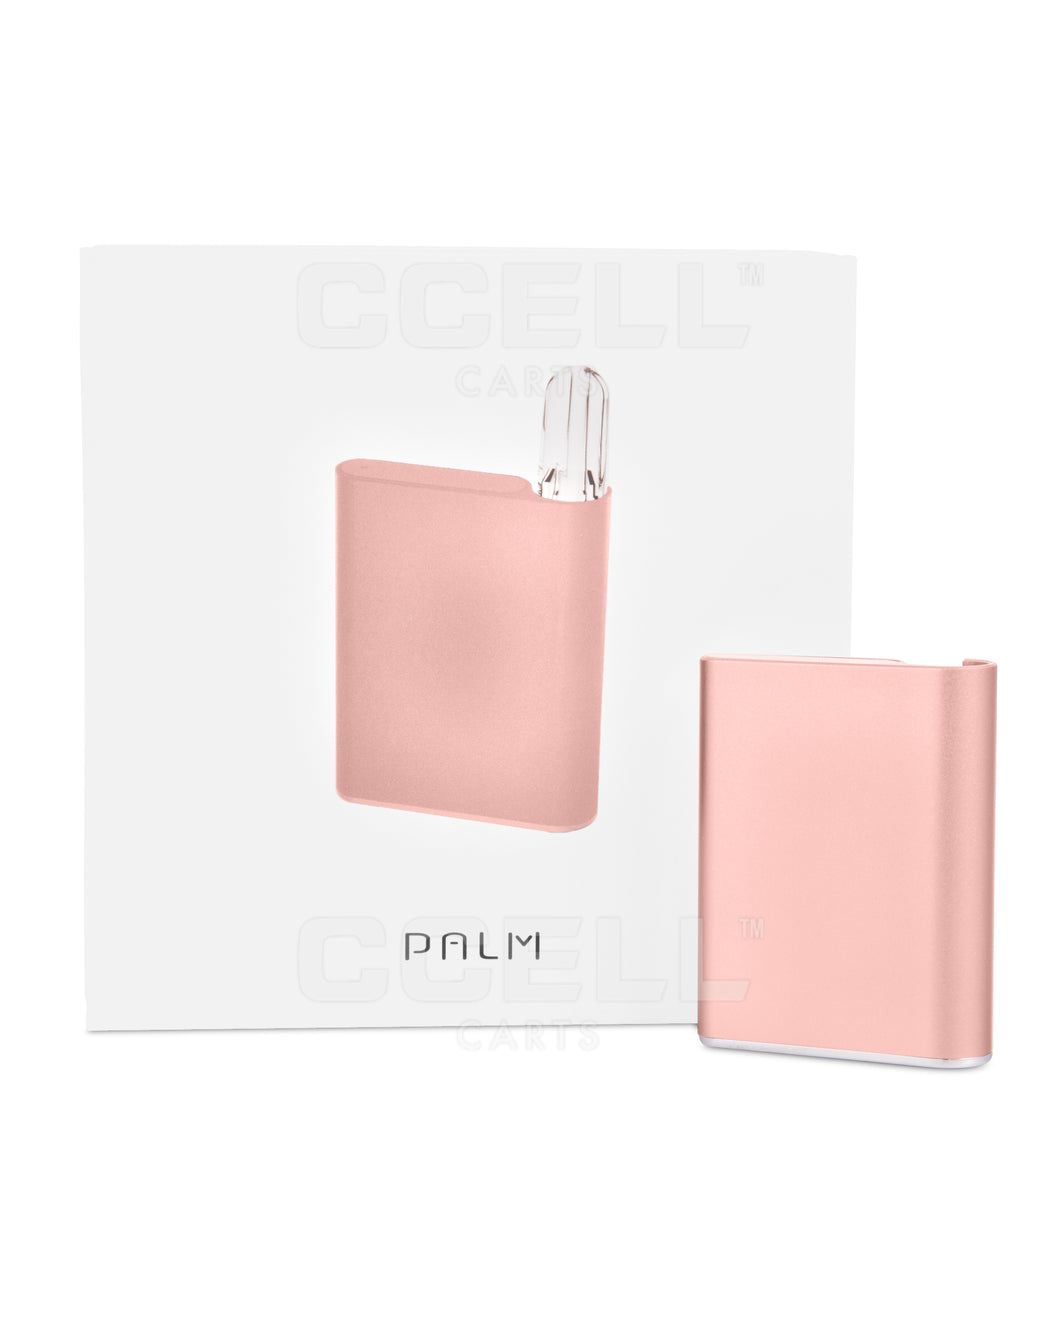 CCELL Palm Power Battery 550mAh - Rose